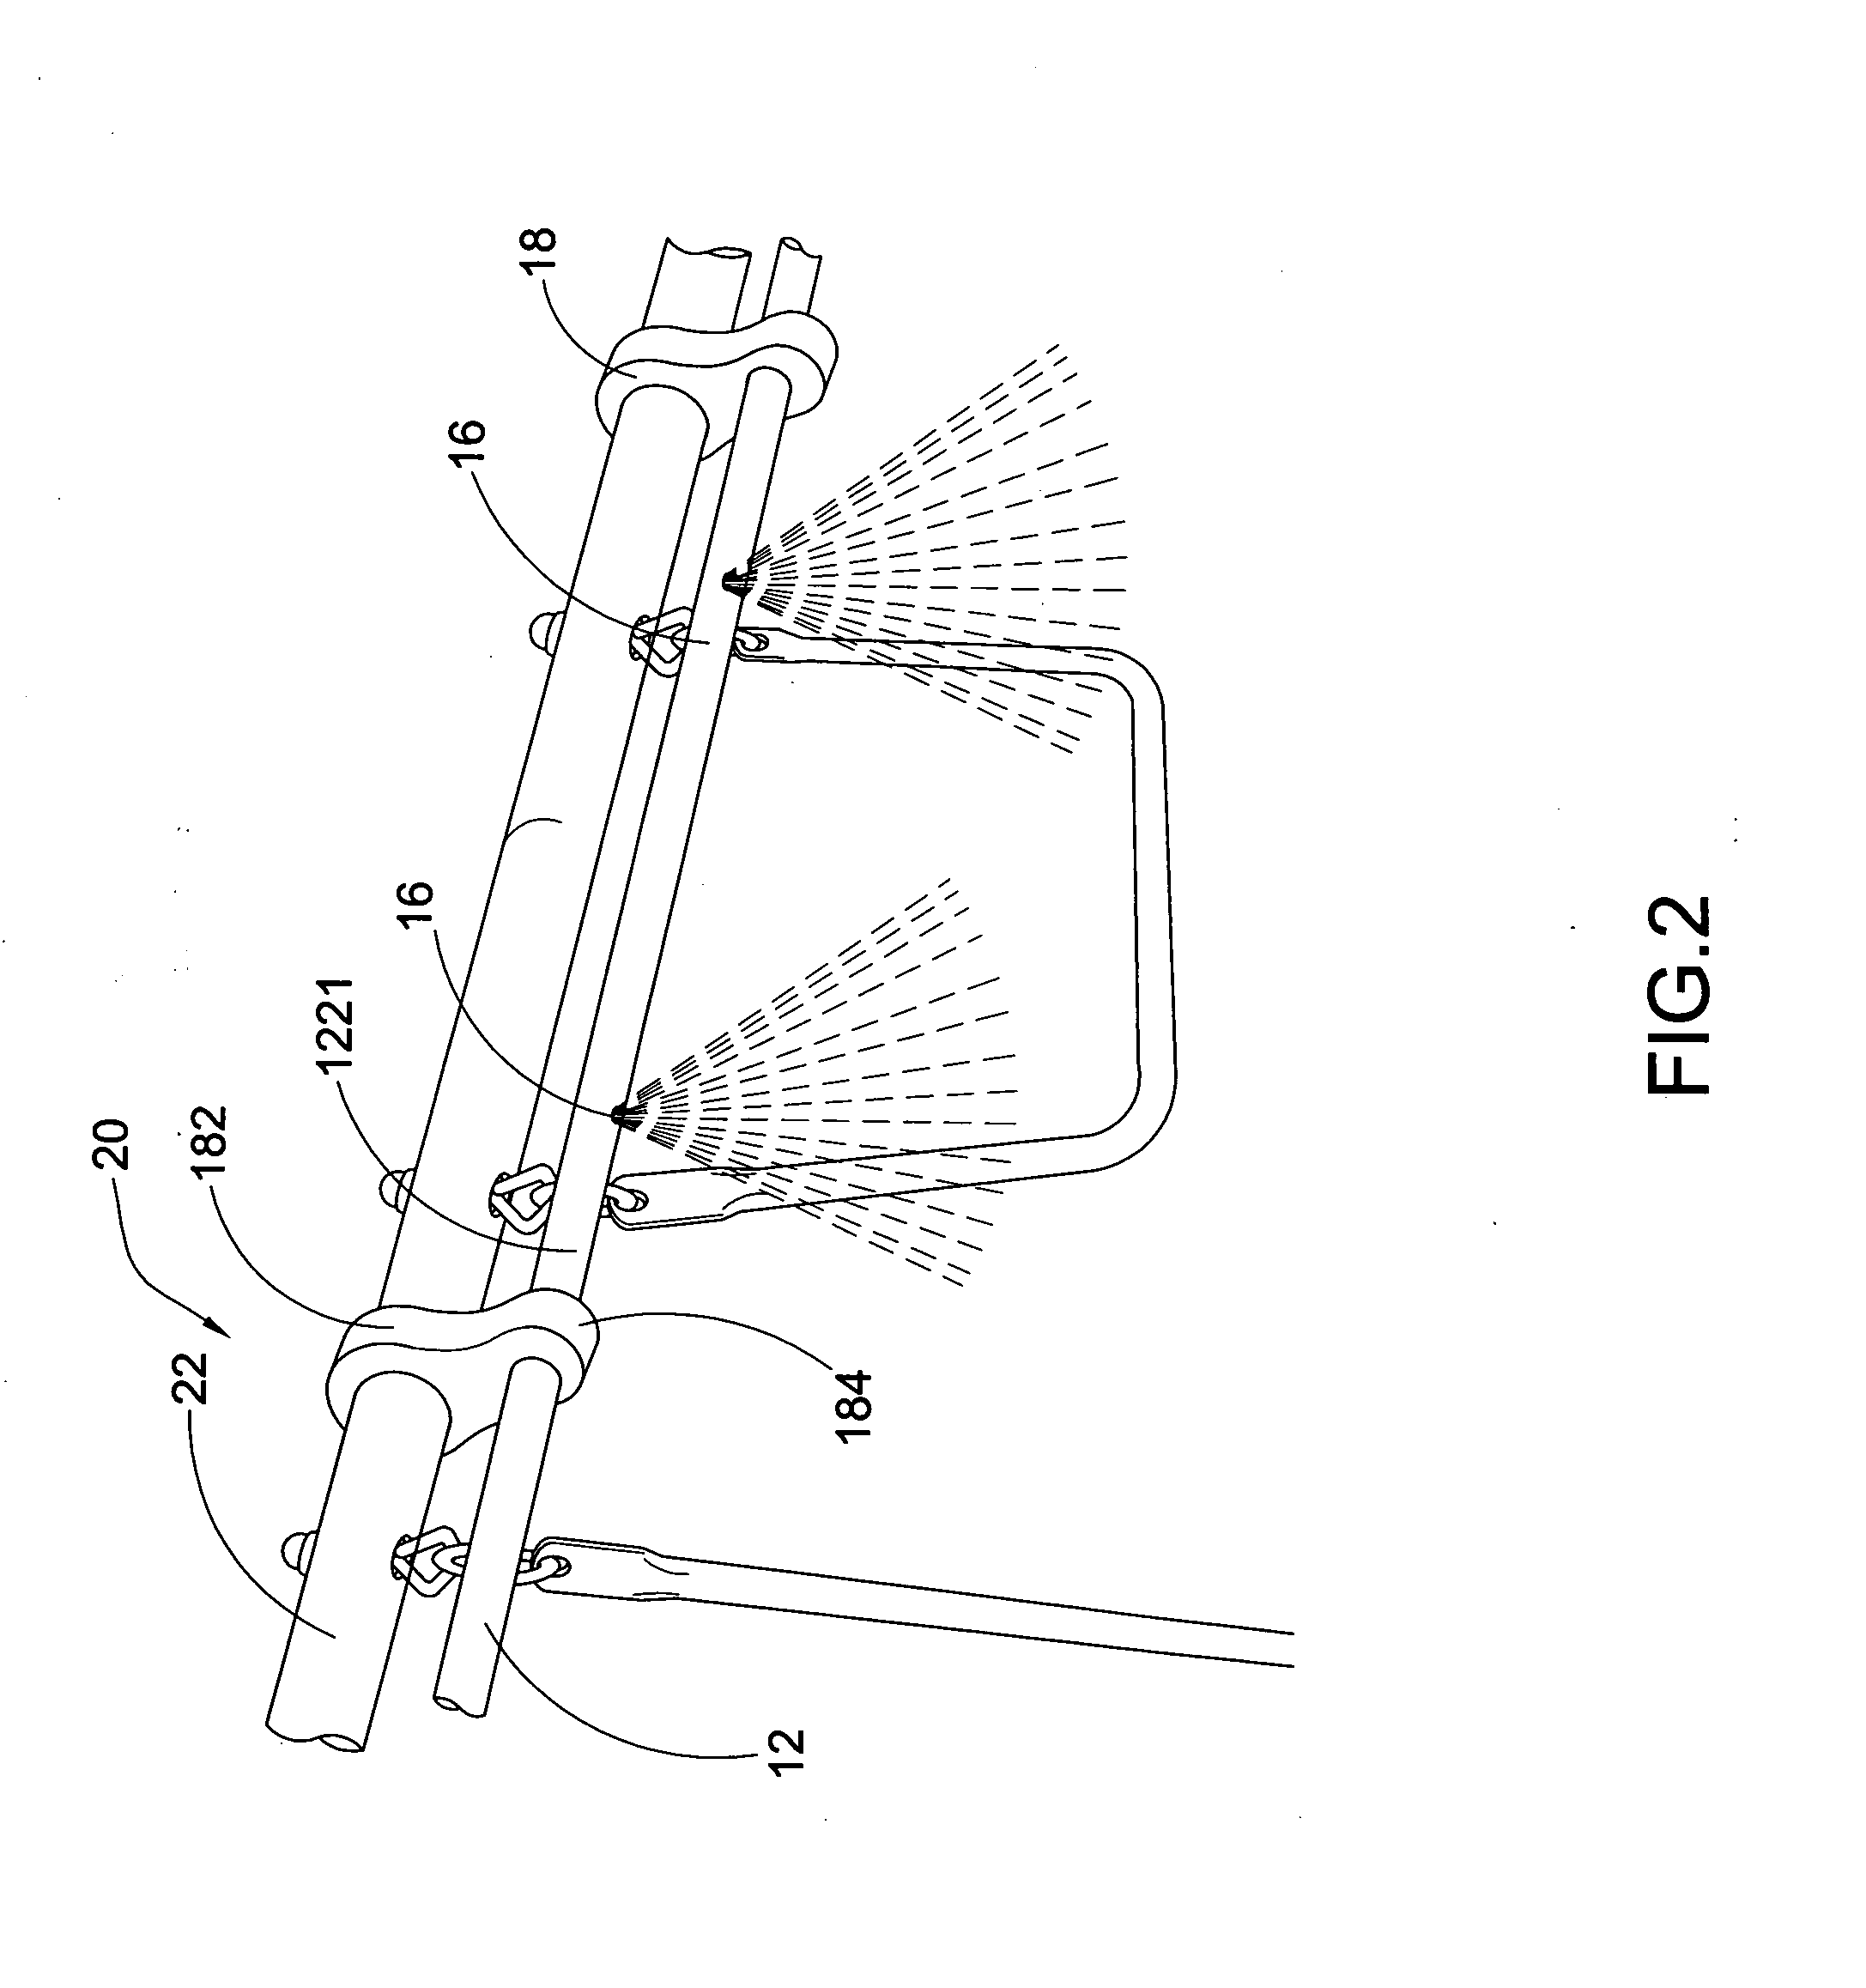 Mist producing device for playground with sun shade apparatus